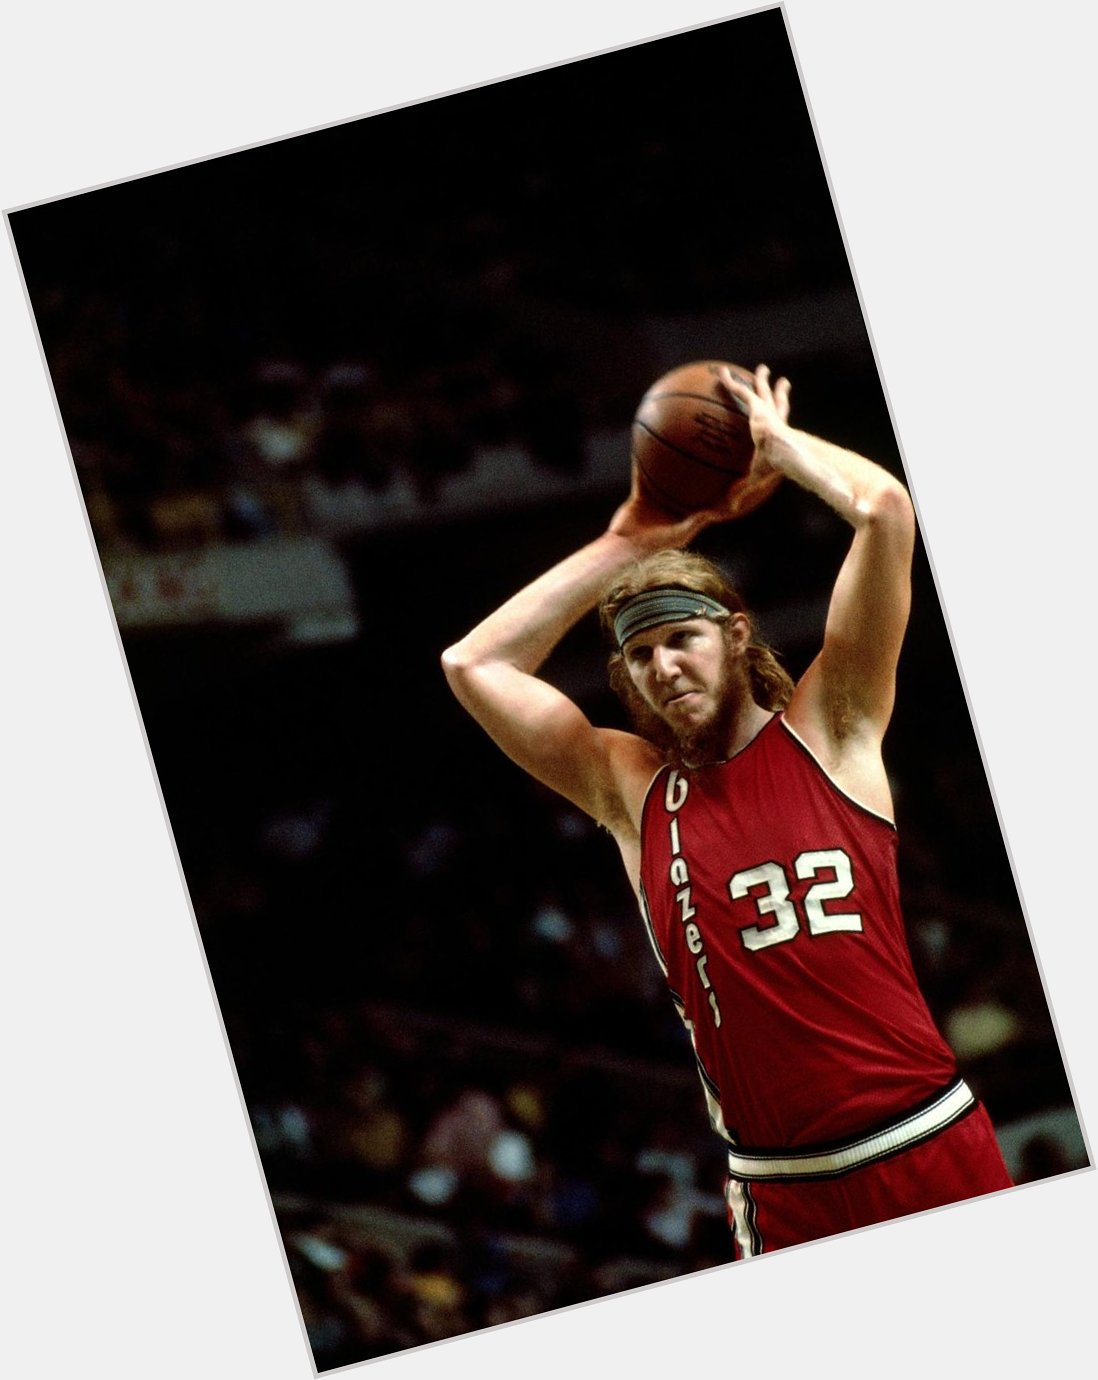 Happy birthday Bill Walton! The former Blazers center won two NBA titles and a Finals MVP award during his career. 